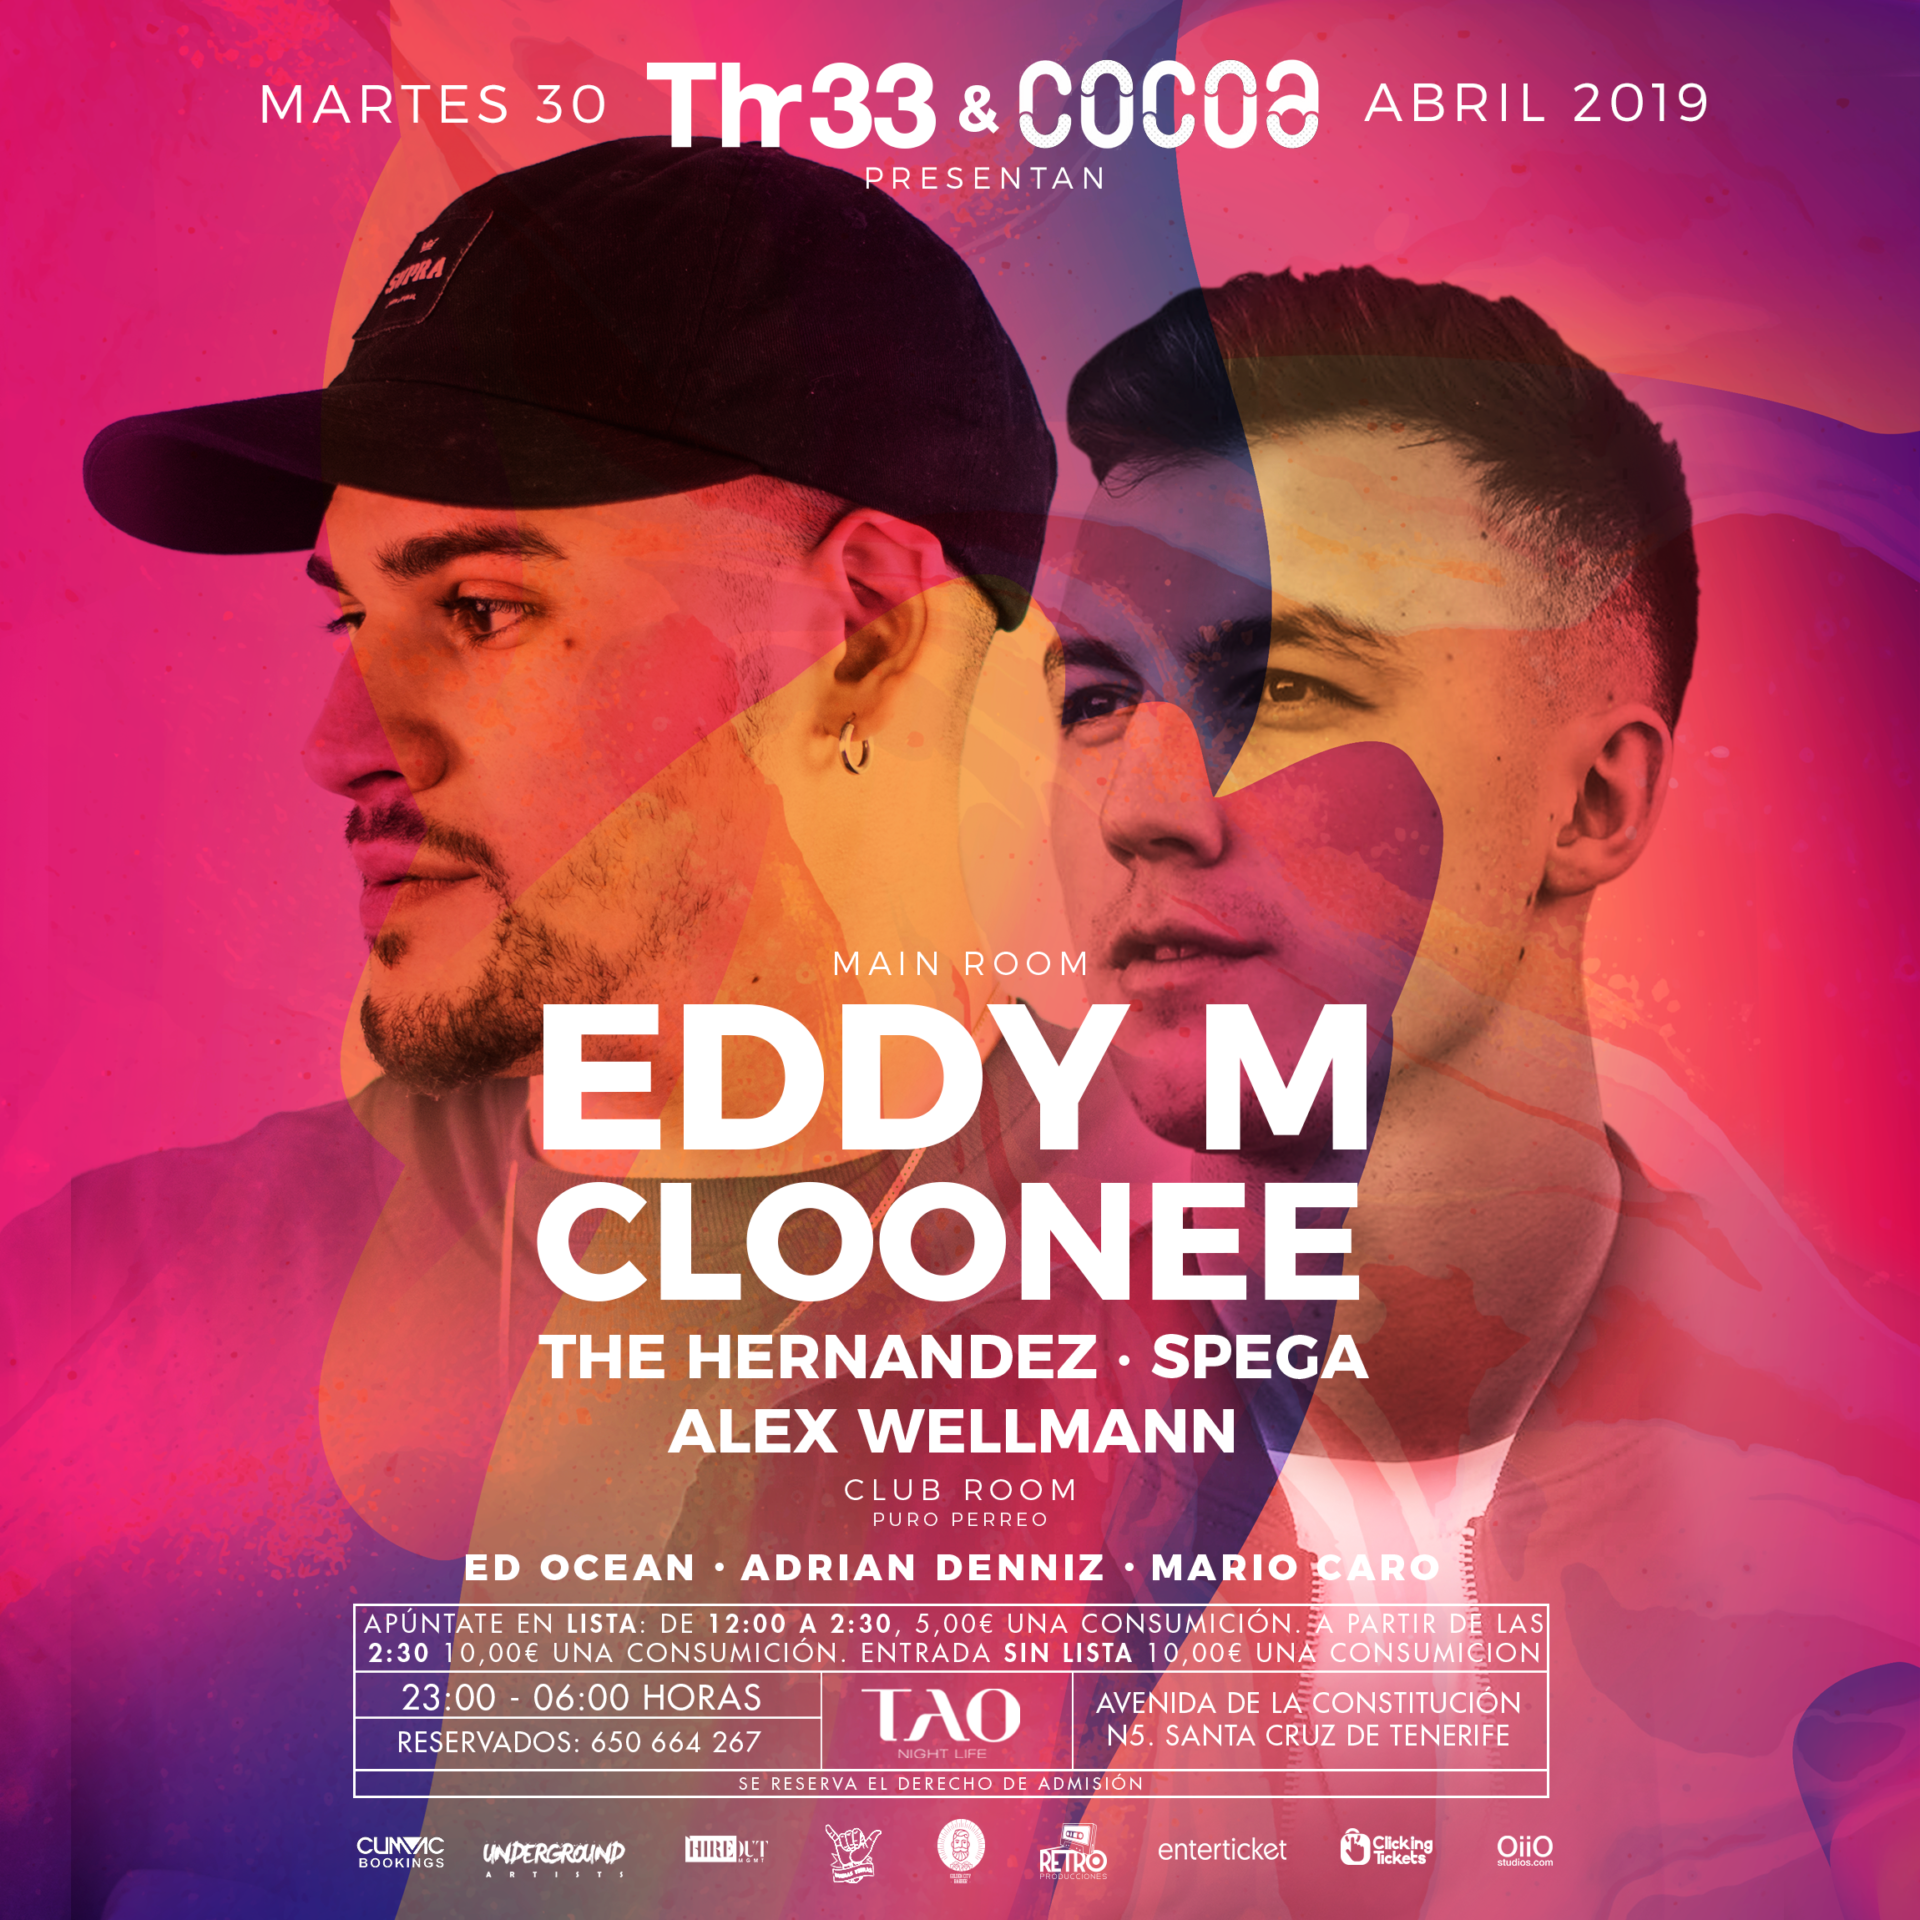 Thr33 Events & Cocoa Music presents Eddy M & Cloonee